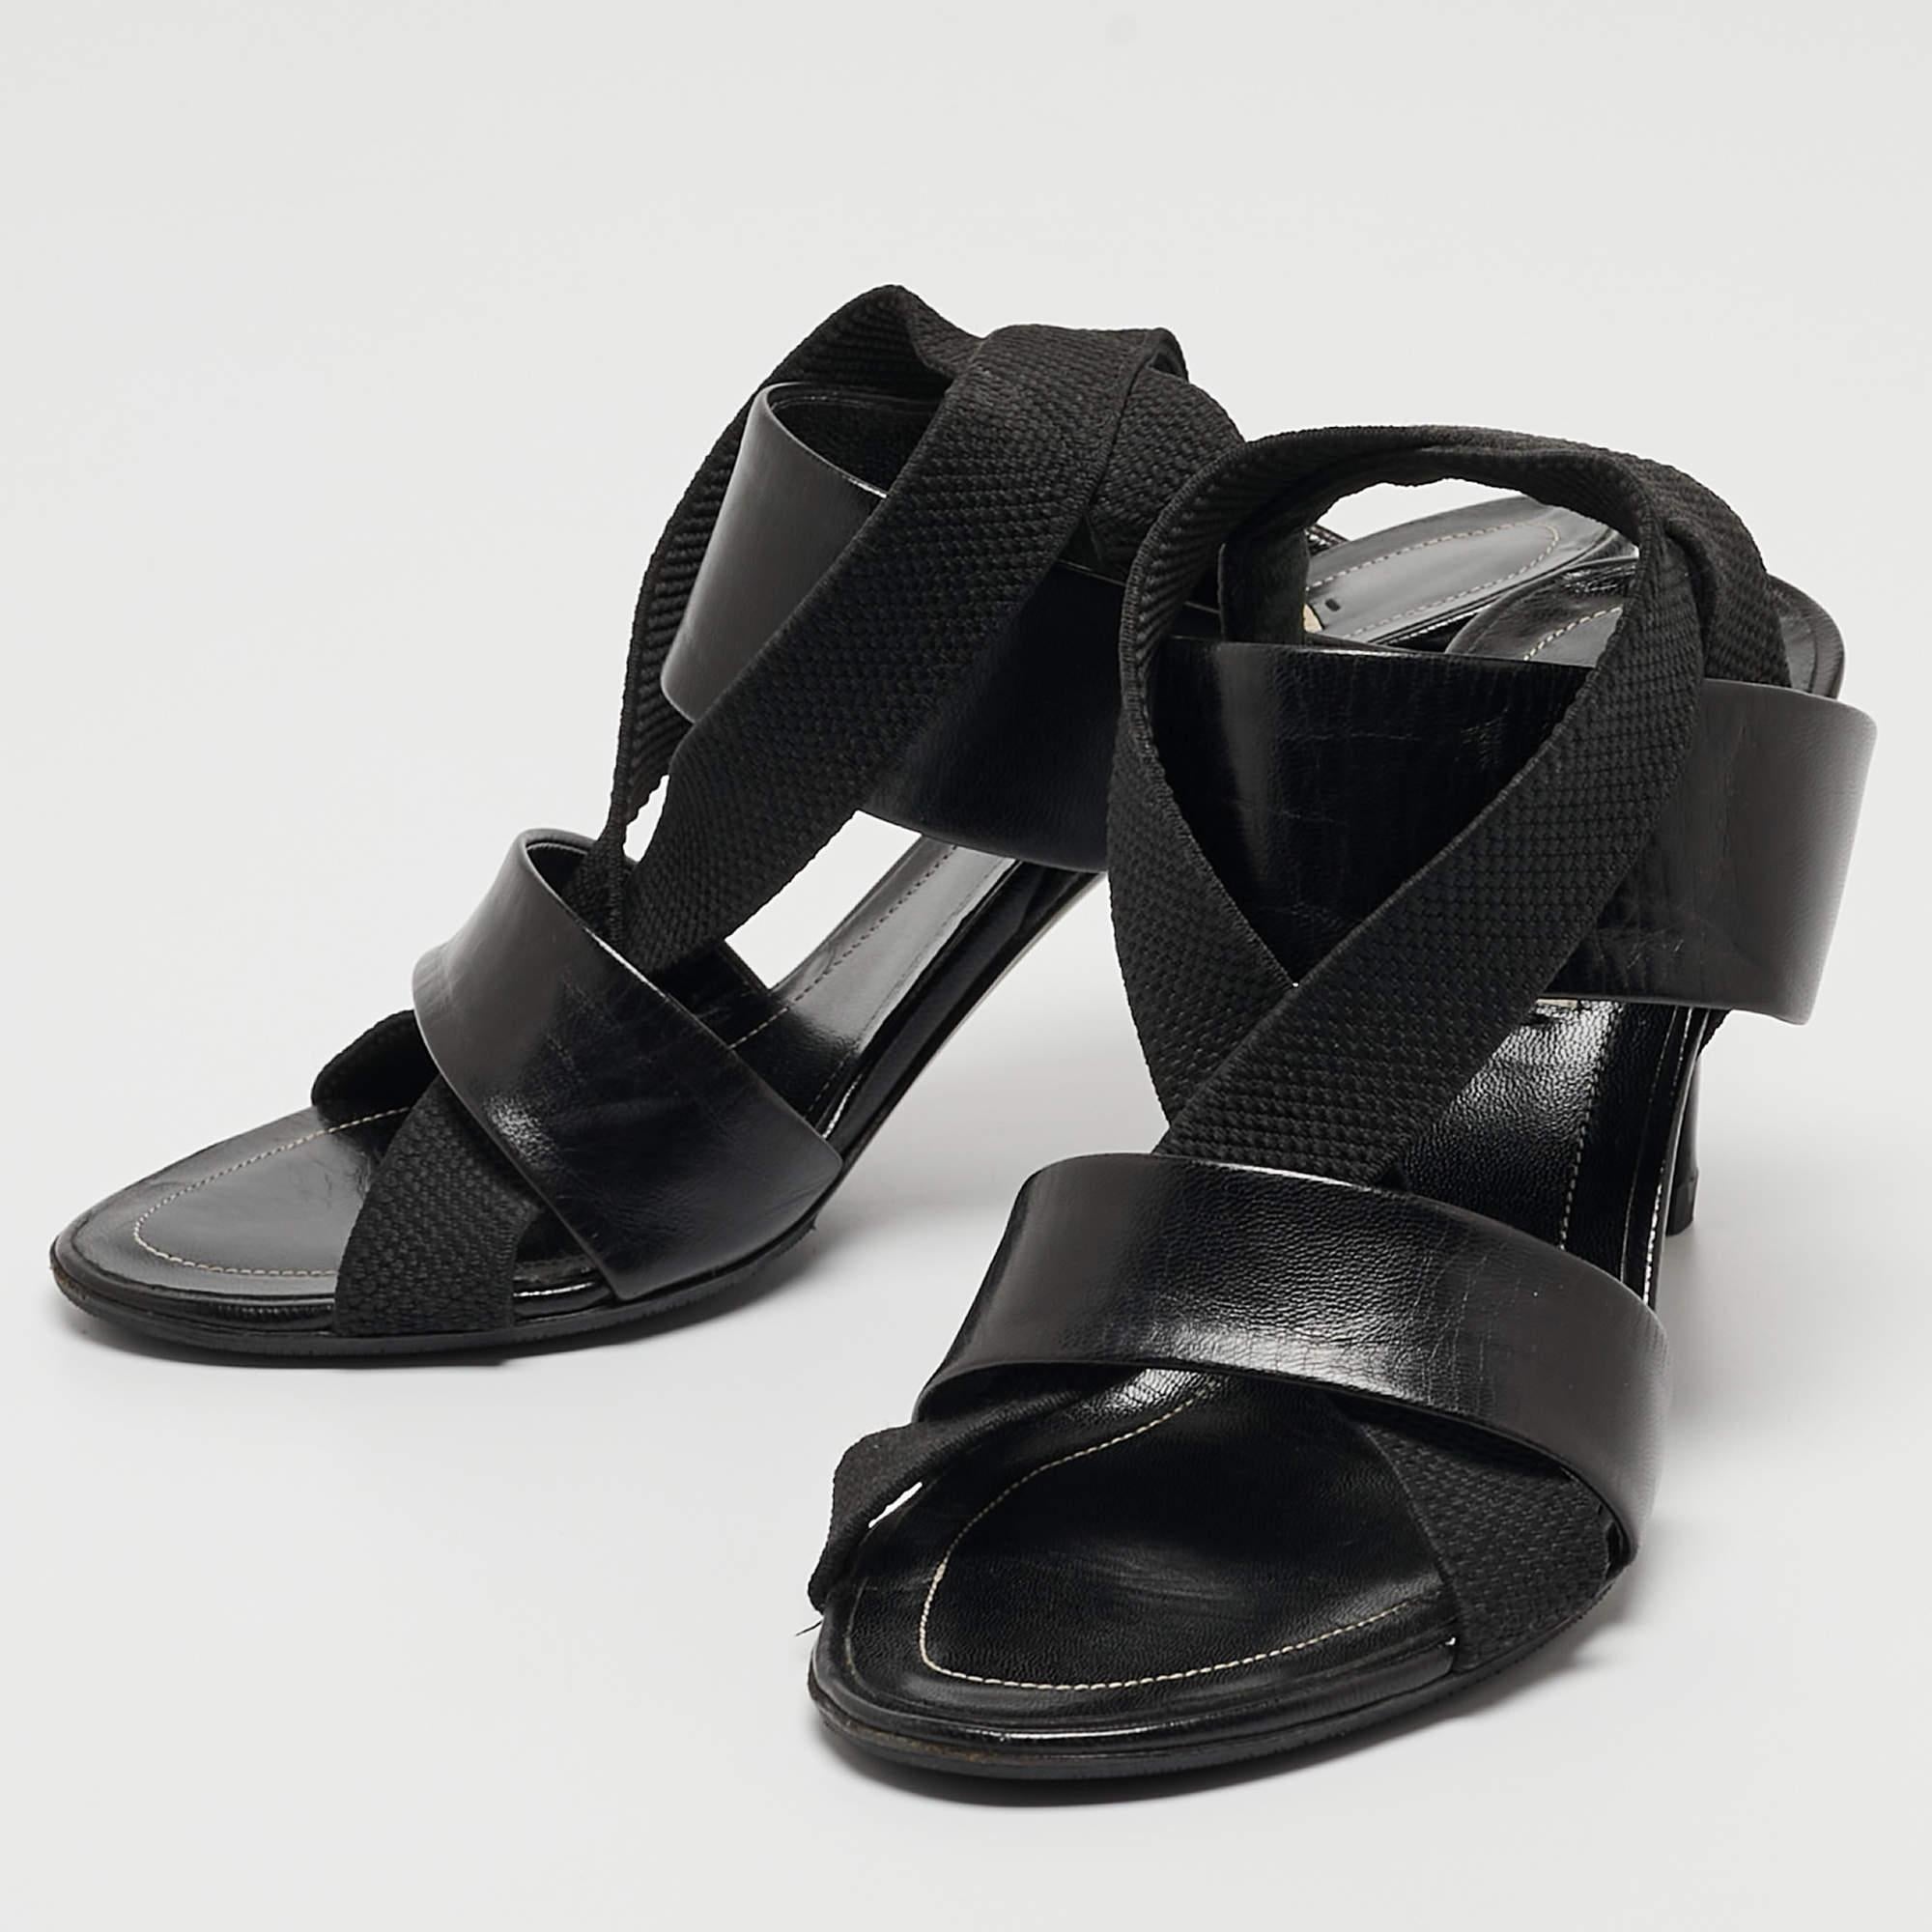 Balenciaga Black Leather and Elastic Strappy Slingback Sandals Size 36 For Sale 1